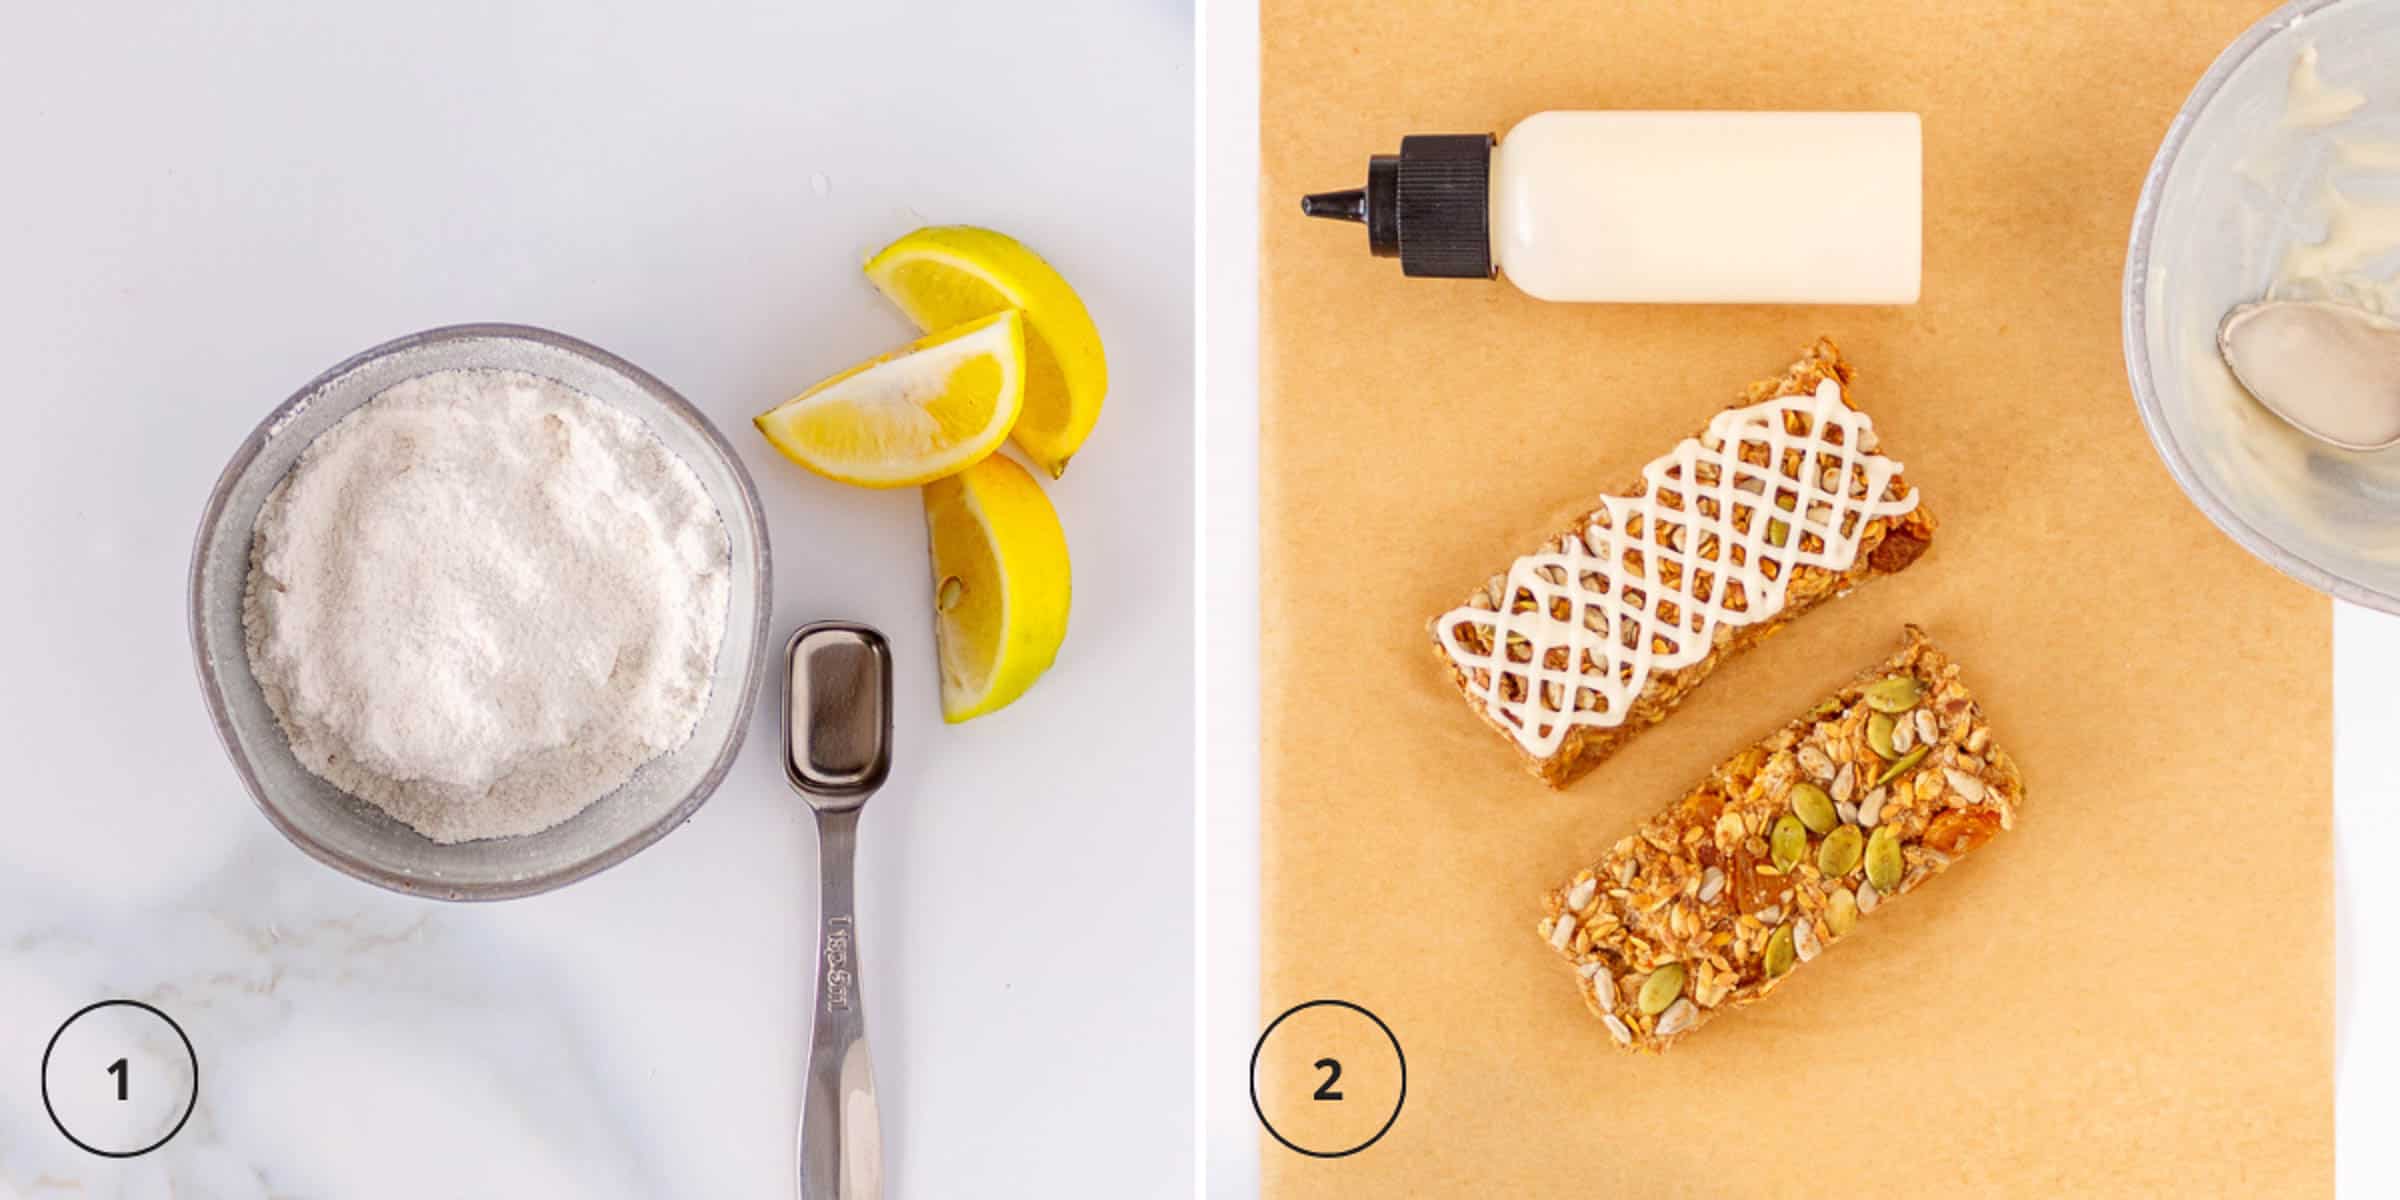 Make frosting with powdered sugar and lemon juice, than decorate oat bars.